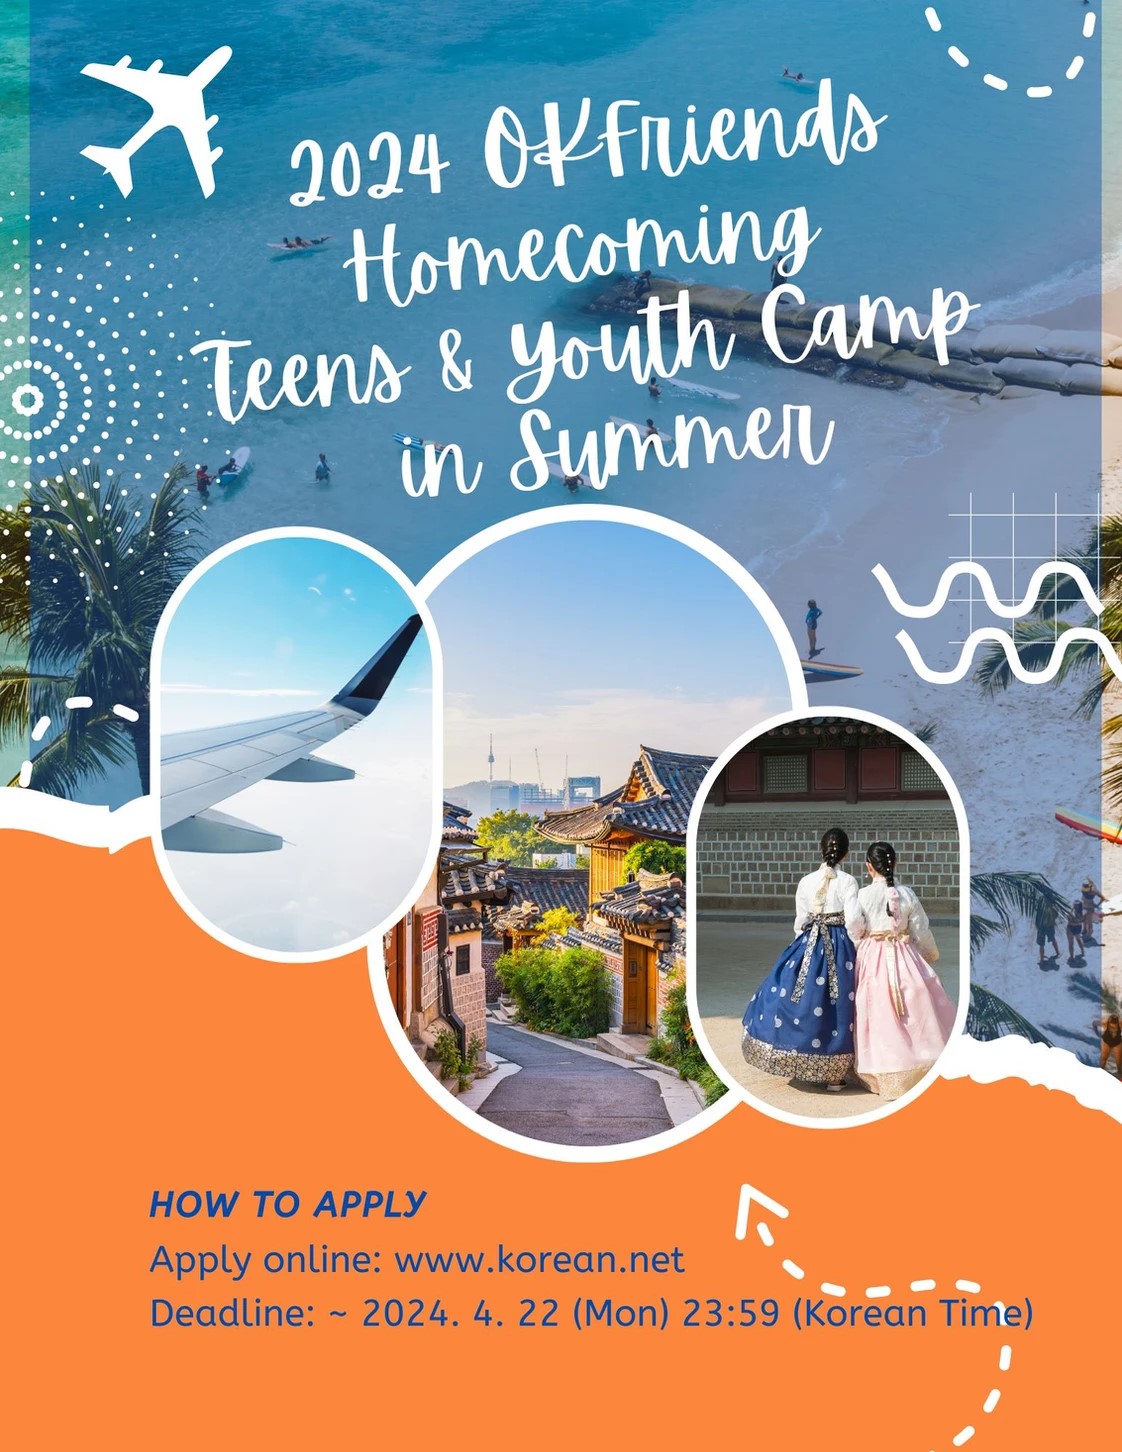 2024 OKFriends Homecoming Teens & Youth Camp in Summer